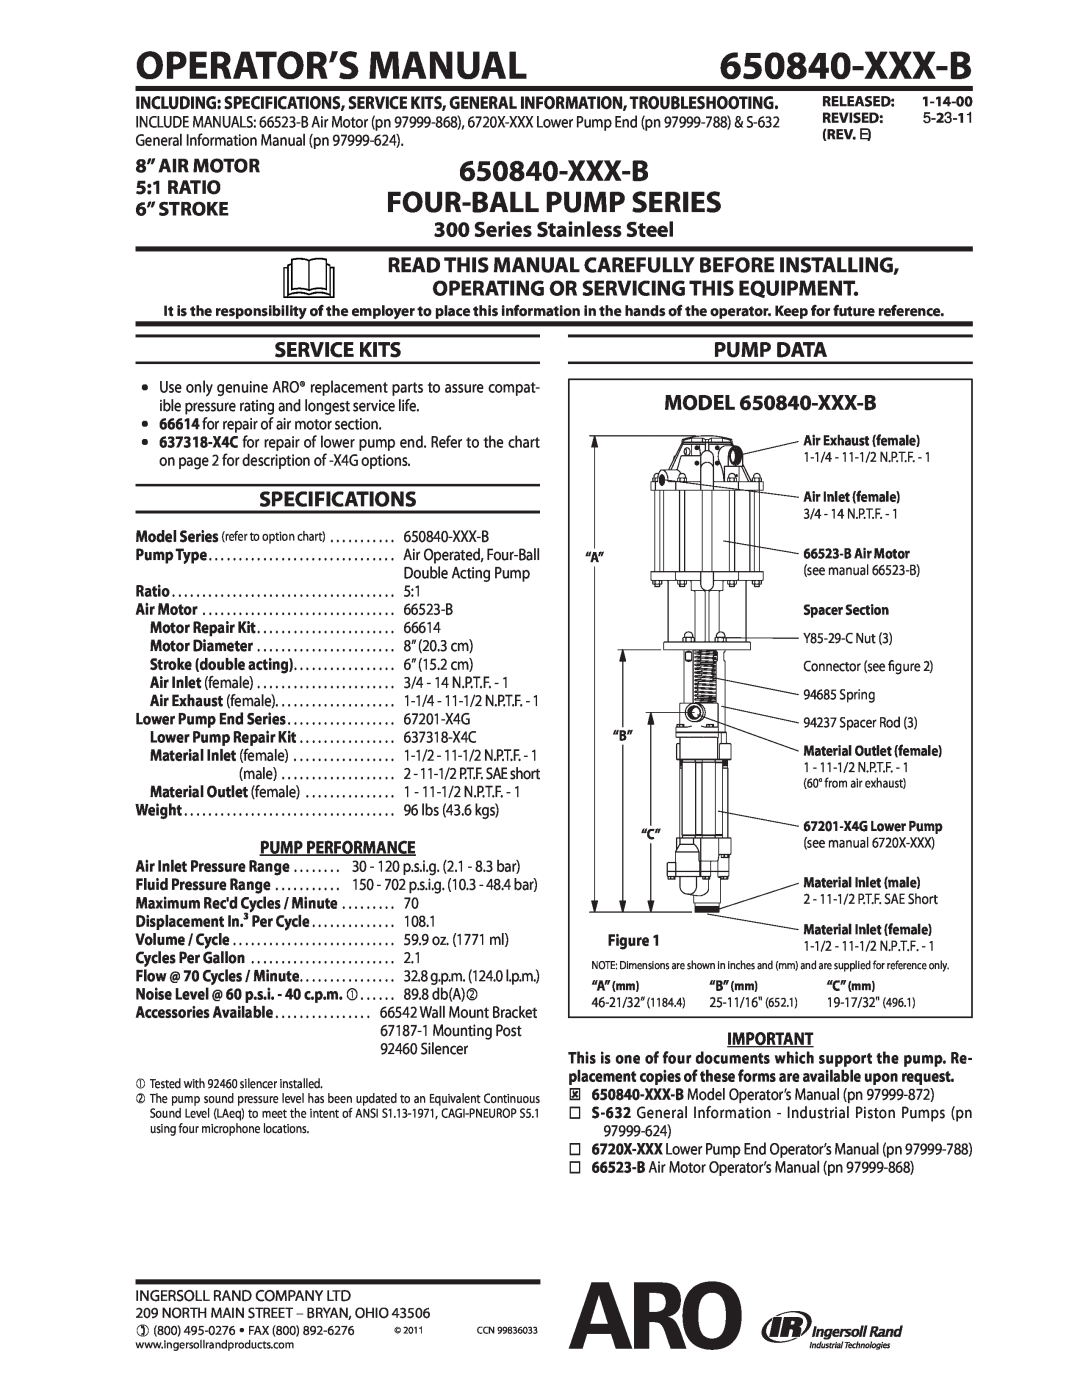 Ingersoll-Rand 650840-XXX-B specifications Series Stainless Steel, Read This Manual Carefully Before Installing, Pump Data 